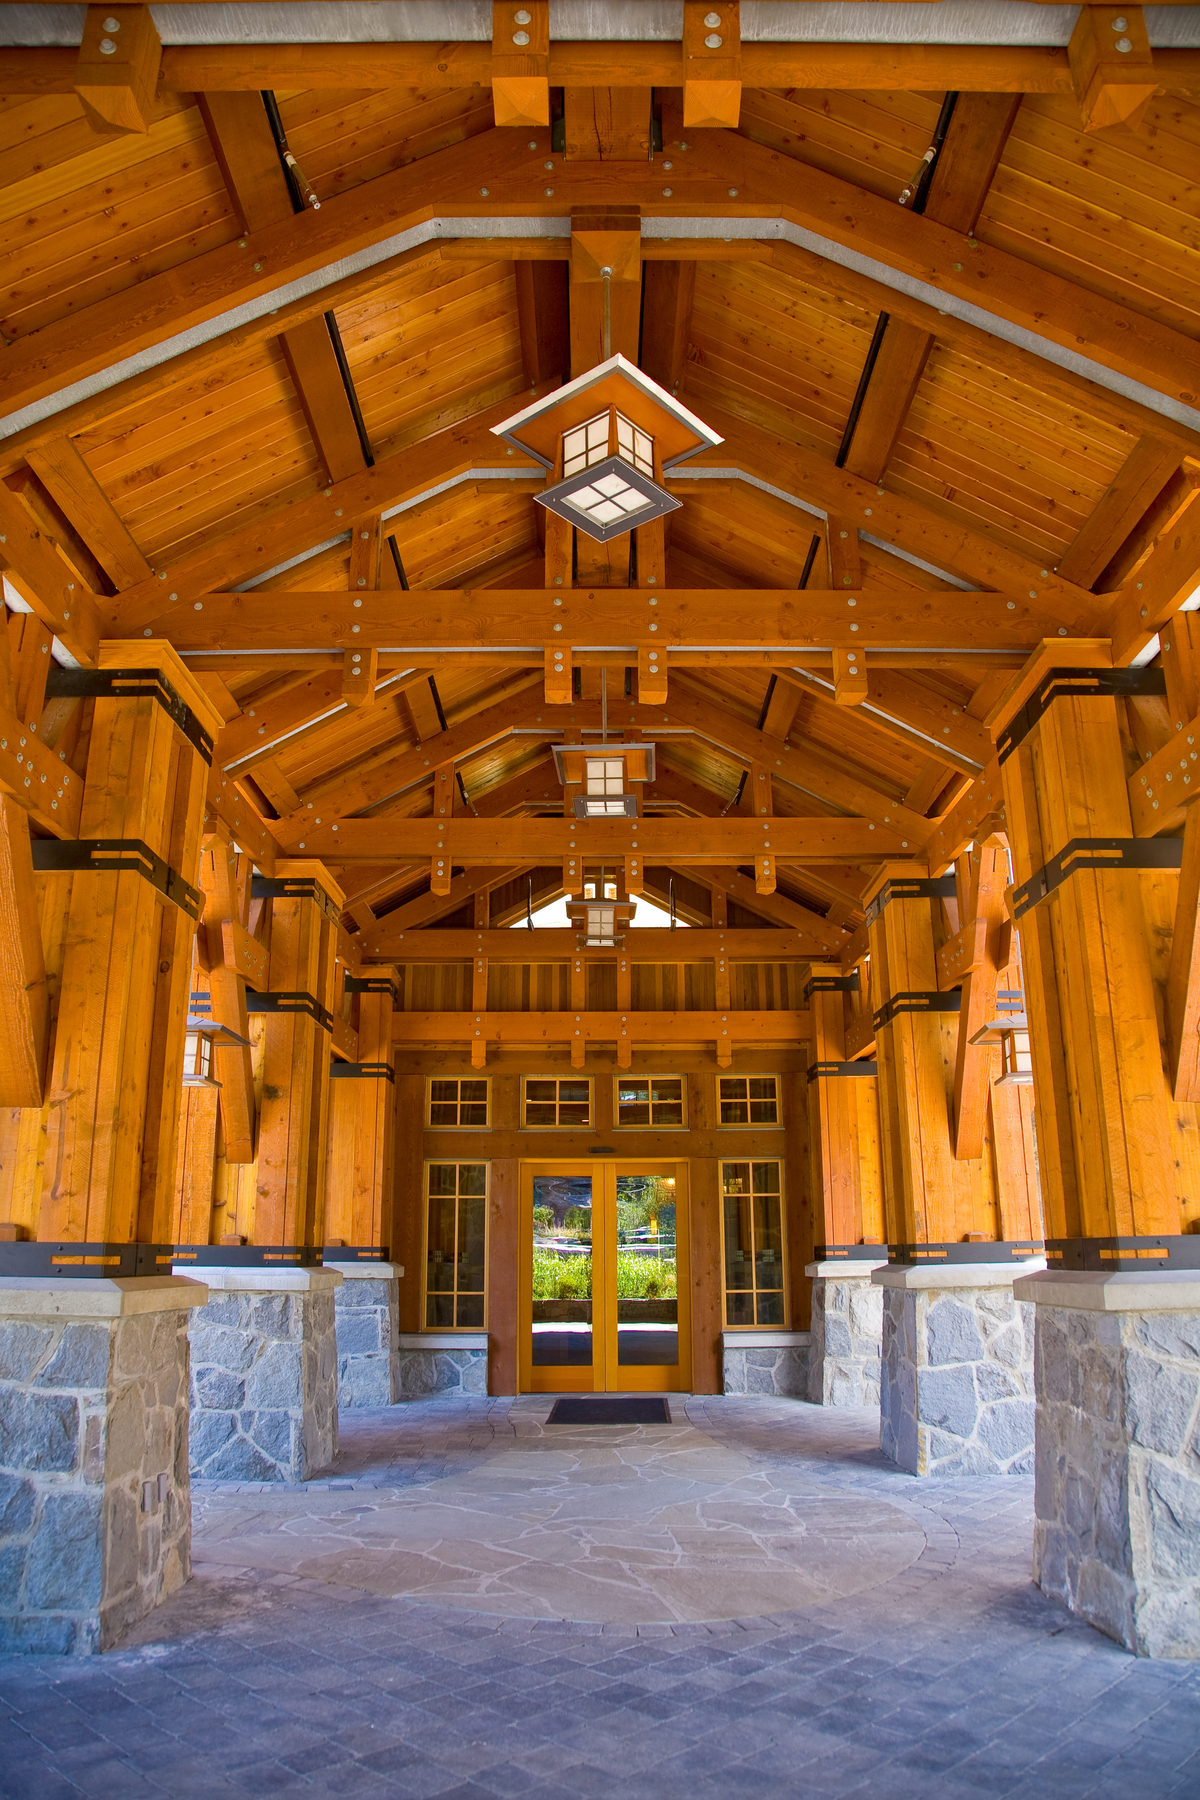 Douglas–fir was used to create the heavy timber post & beam and wood-steel composite construction shown here as part of the exterior entryway to the Nita Lake Lodge